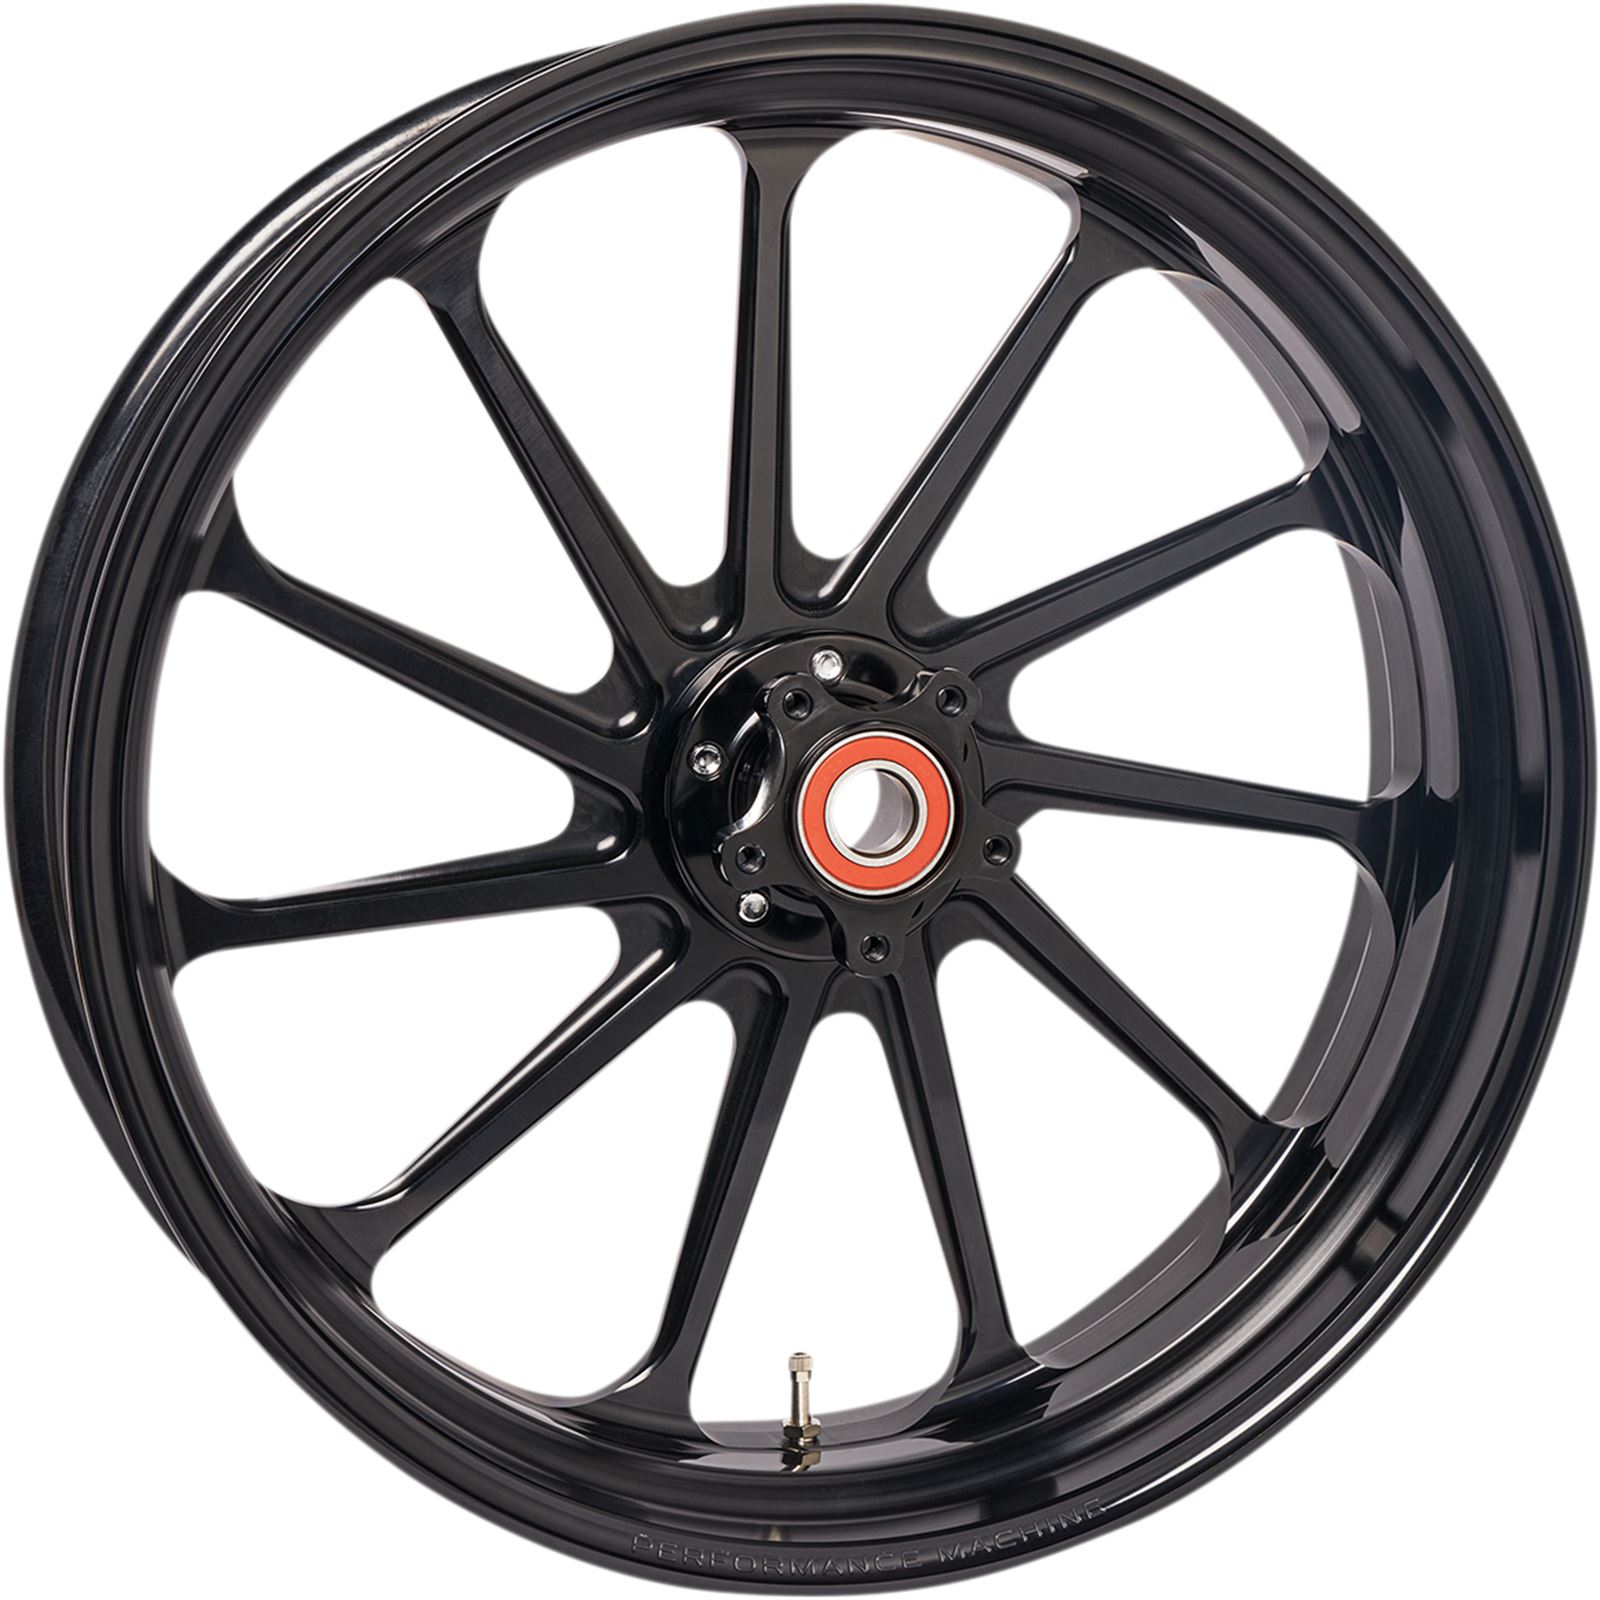 Performance Machine Wheel - Assault - Dual Disc - Front - Black Ops™ - 21"x3.50" - With ABS